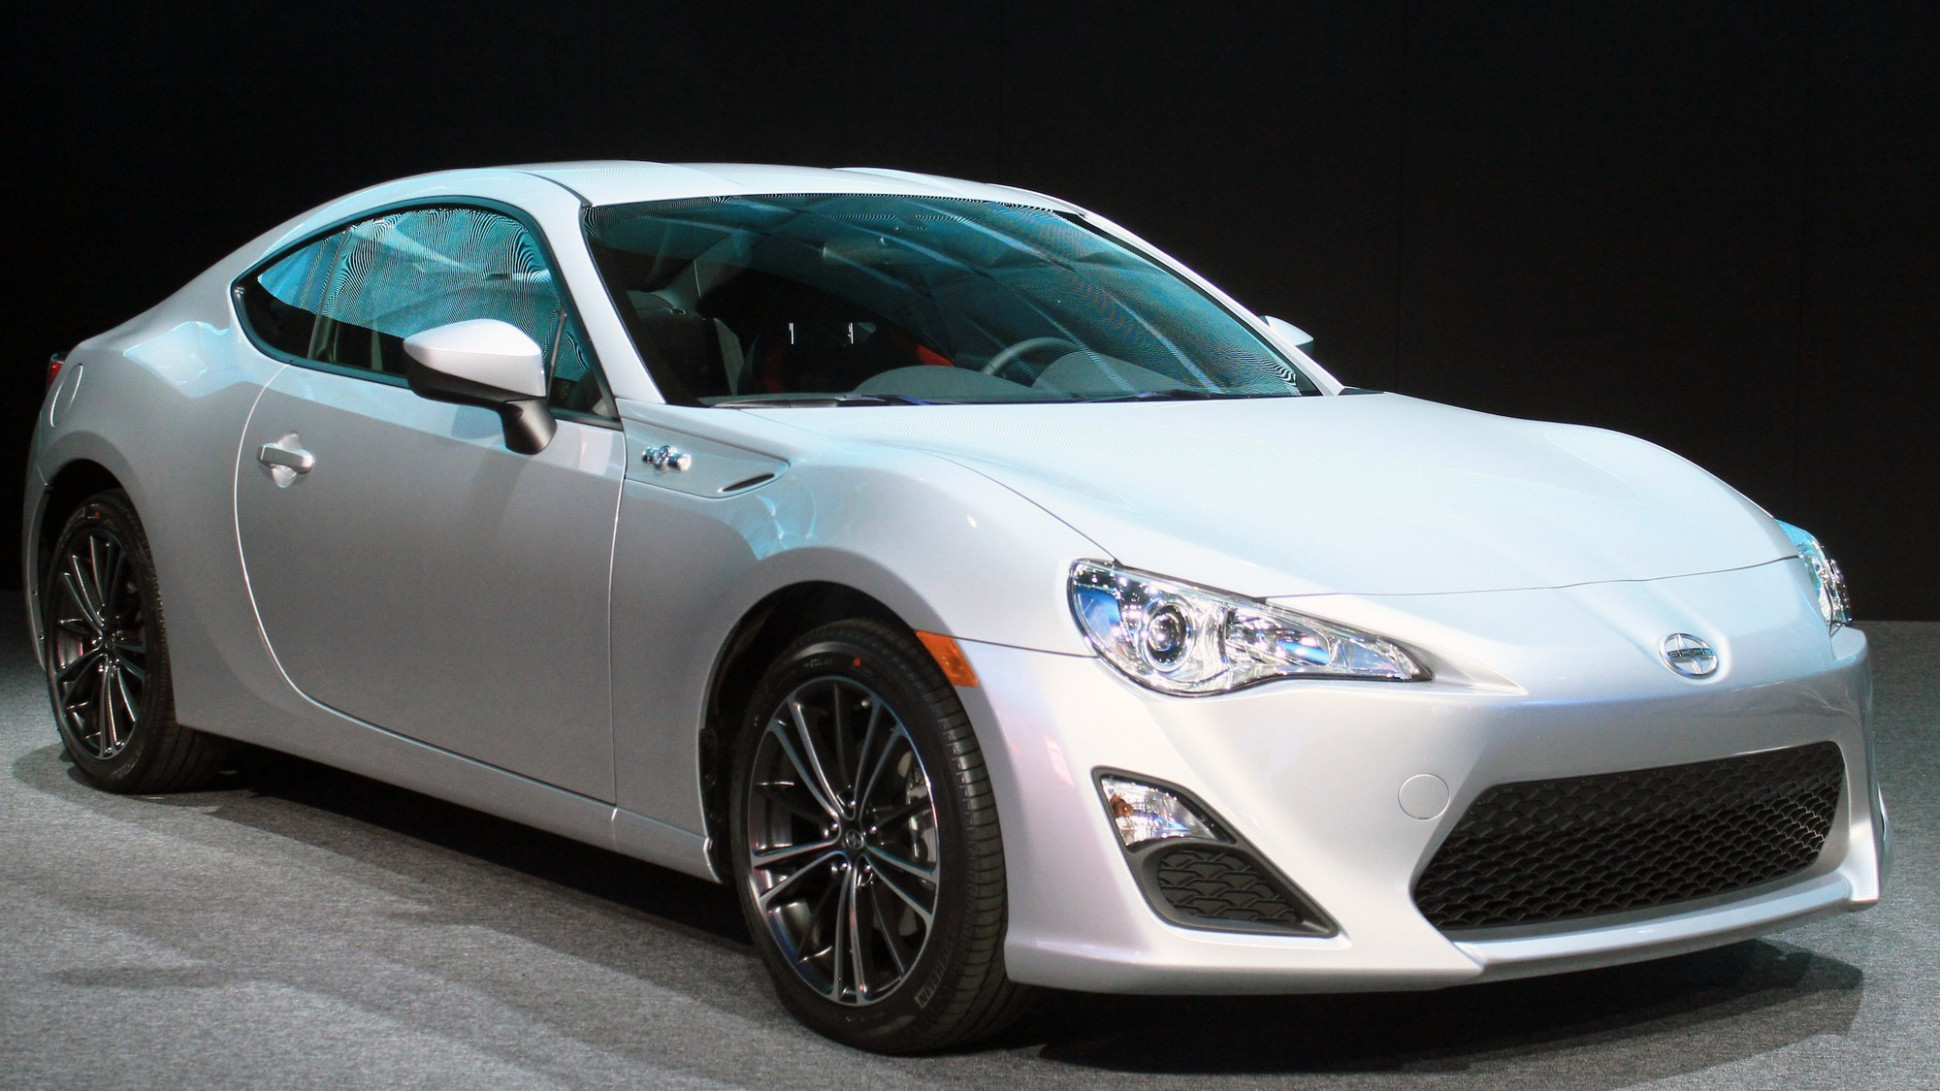 Toyota Confirms That Stripped Scion FR-S Models Not U.S